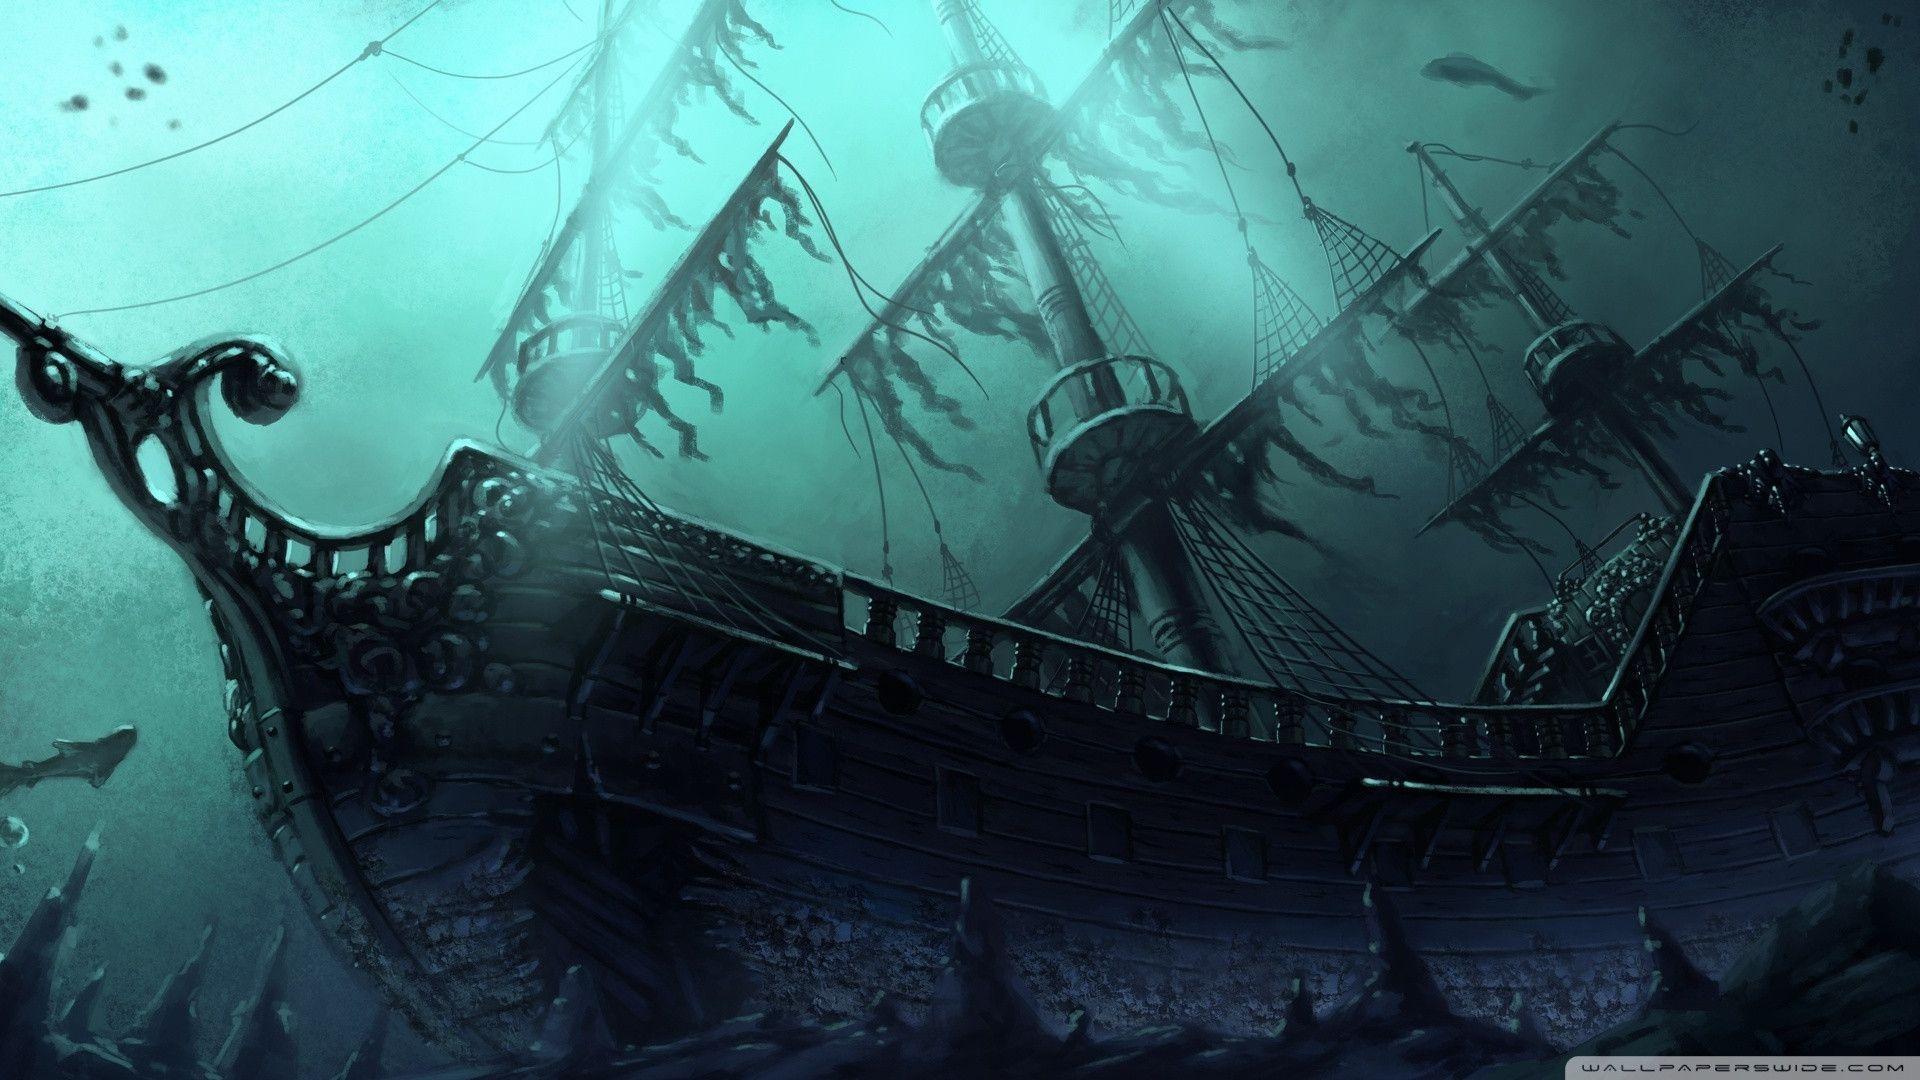 A large black ship is in the water - Pirate